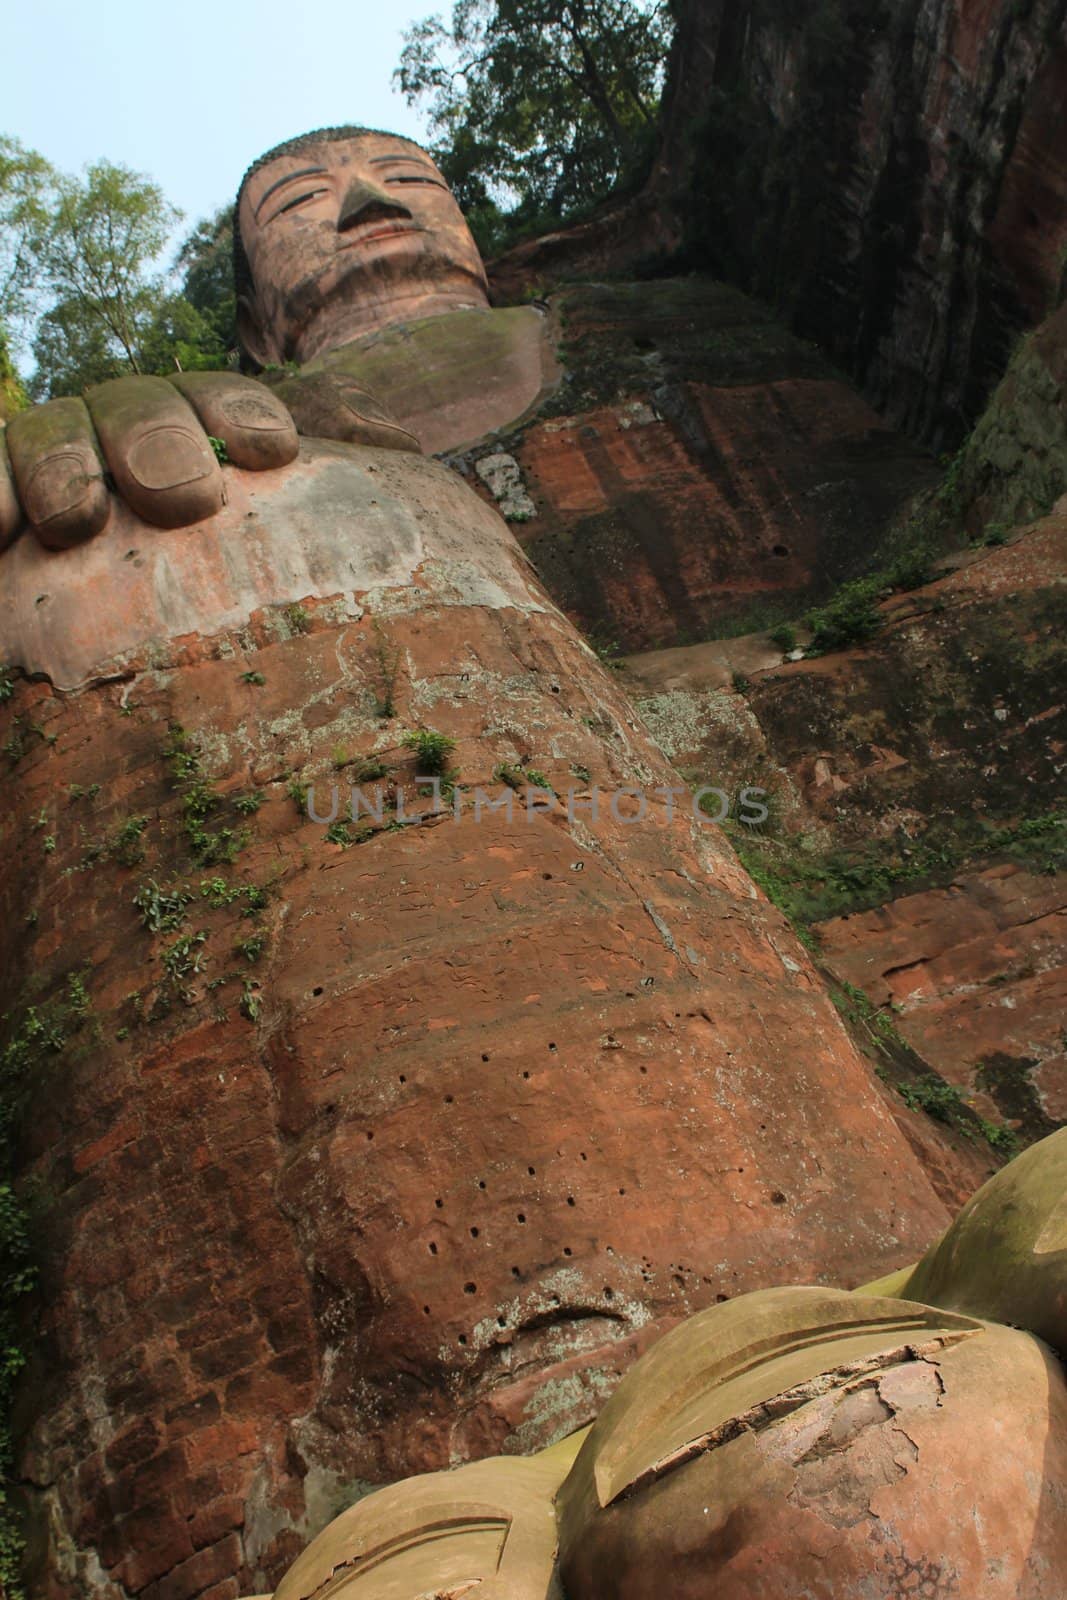 Leshan Giant Buddha, view from above. It is the largest stone Buddha in the world and it is by far the tallest pre-modern statue in the world. Leshan Giant Buddha Scenic Area has been listed as a UNESCO World Heritage Site since 1996.
